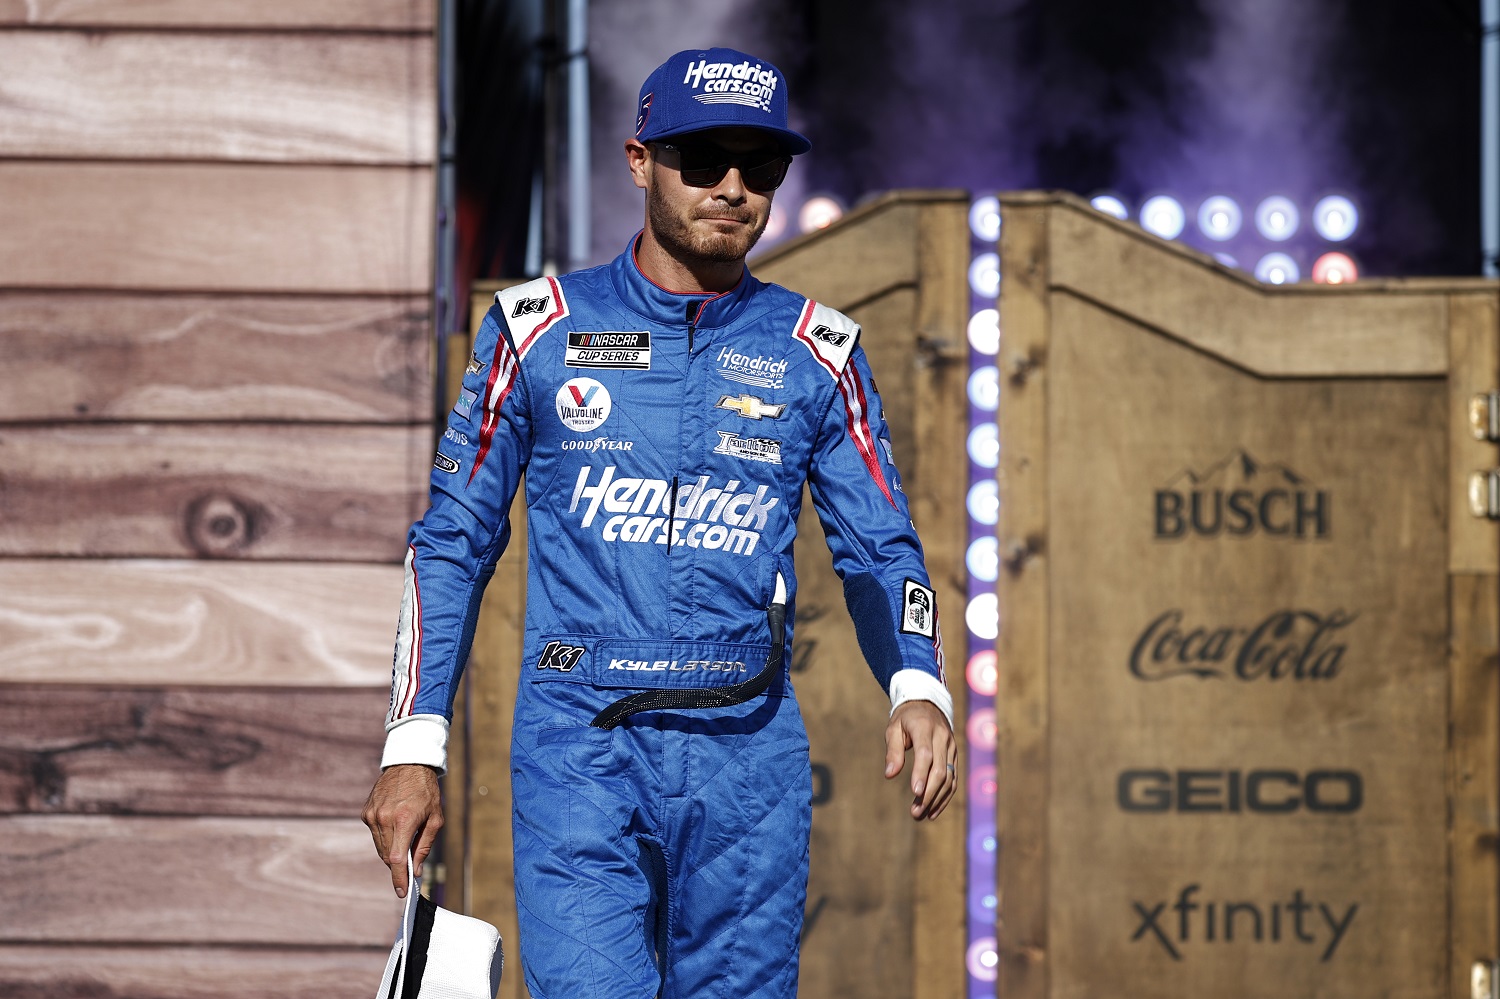 Kyle Larson walks onstage during driver introductions prior to the NASCAR All-Star Race at Texas Motor Speedway on June 13, 2021. | Chris Graythen/Getty Images